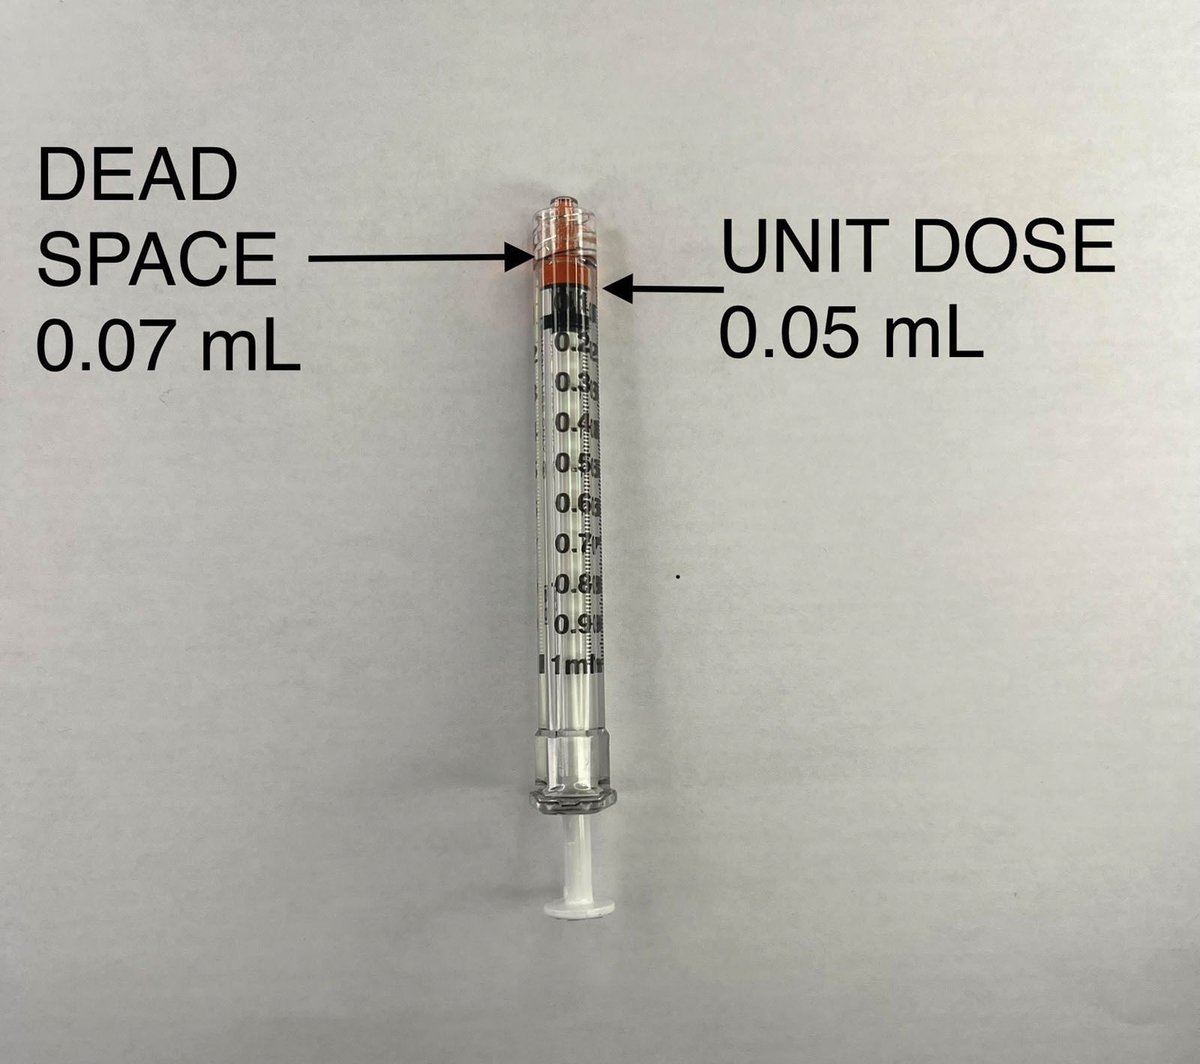 Images in #Anesthesiology - Every Little Bit Counts: Syringe Dead Space 📷 ow.ly/rBWs50RptvB